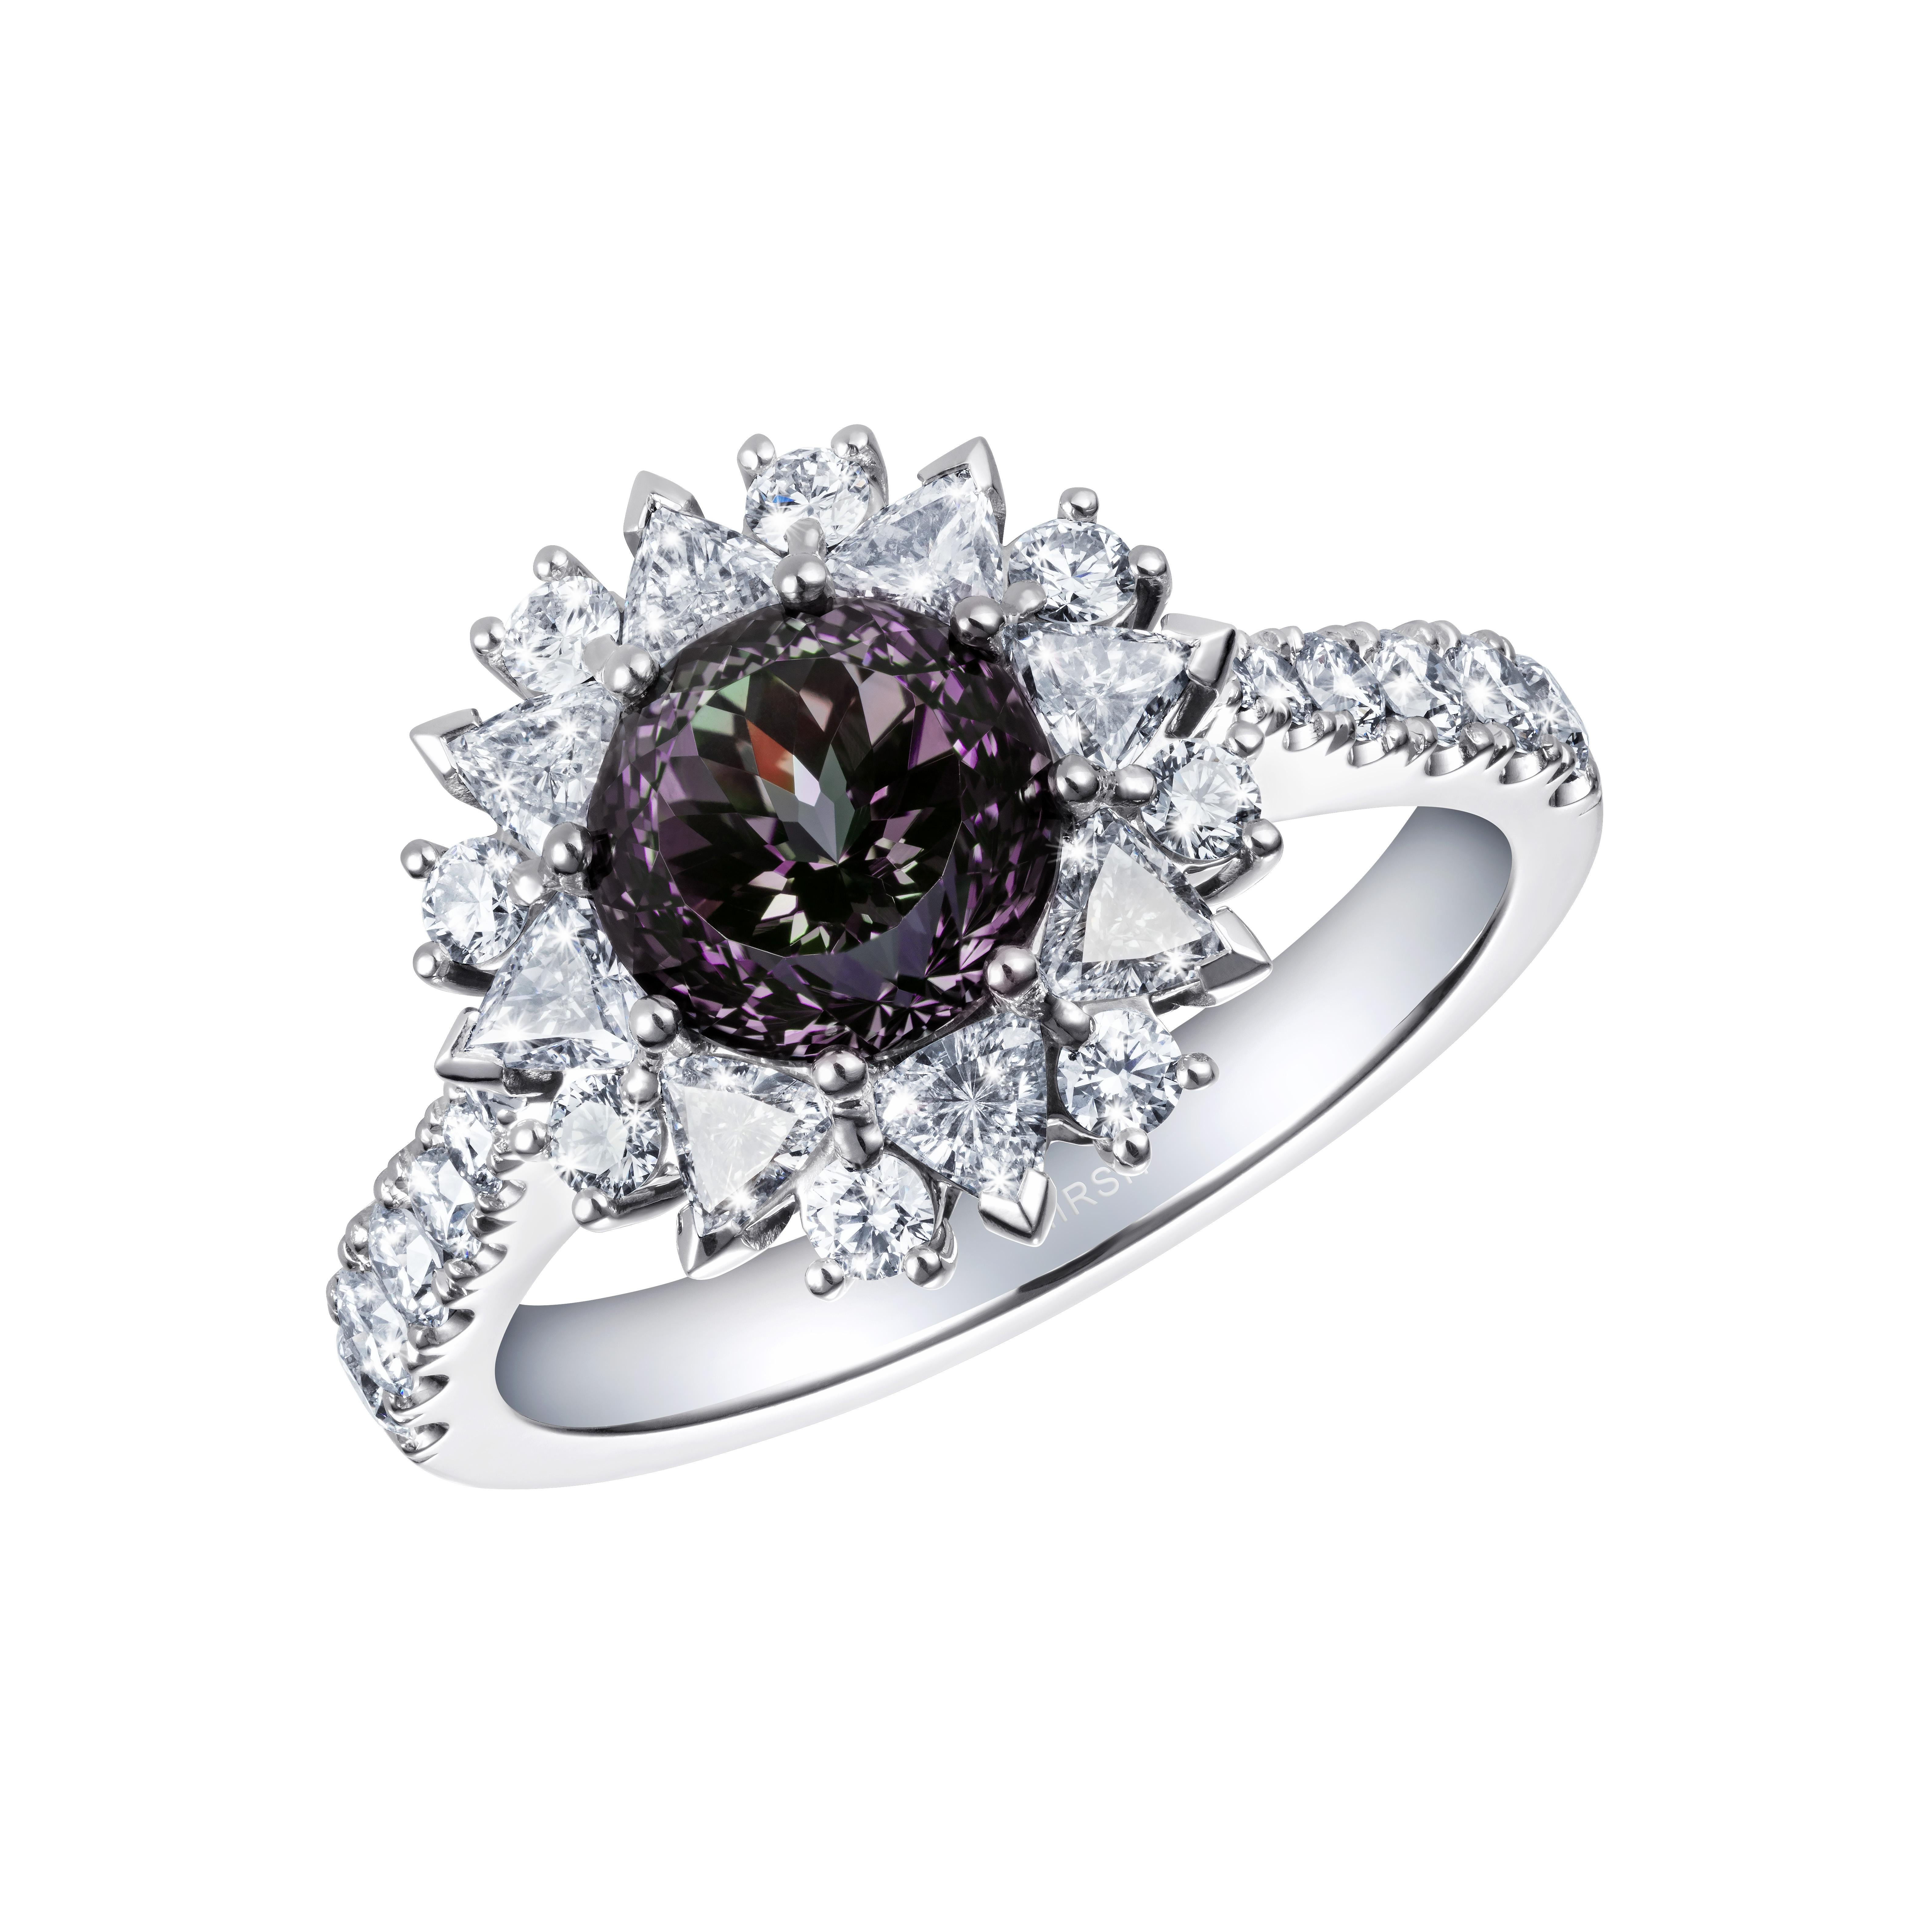 An extremely rare colour-change natural Alexandrite, surrounded by 46 white diamonds. The Alexandrite changes from deep purple in incandescent light to green in daylight.

- 1.92 carat natural Alexandrite with gemological certificate
- 46 diamonds